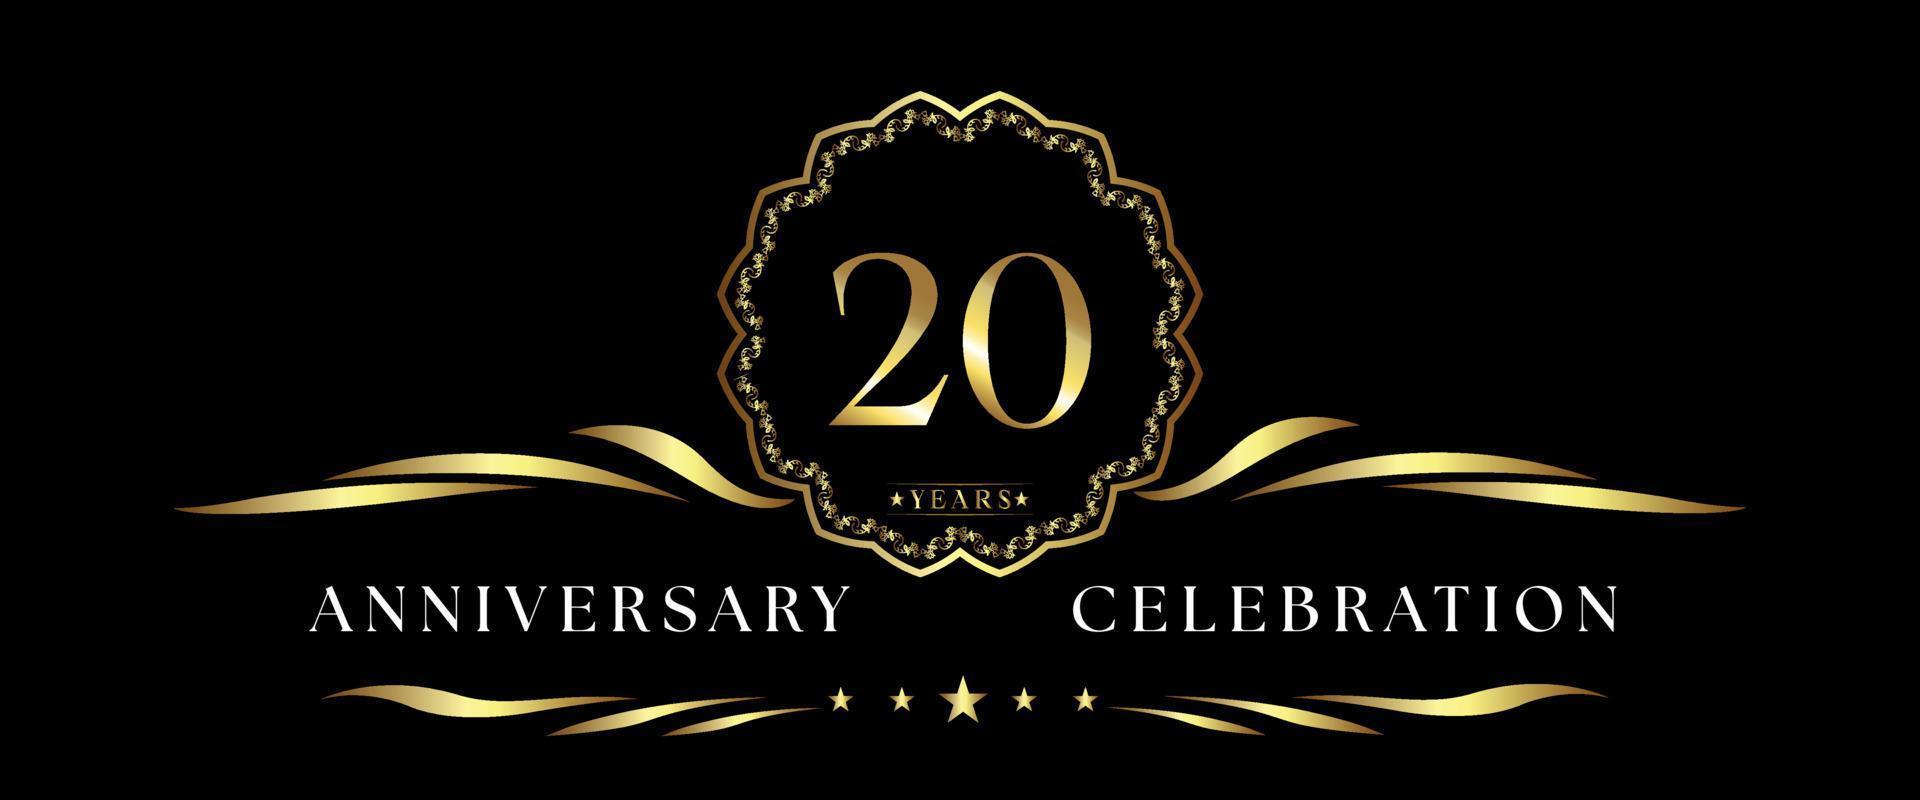 20 years anniversary celebration with gold decorative frame isolated on black background. Vector design for greeting card, birthday party, wedding, event party, ceremony. 20 years Anniversary logo.